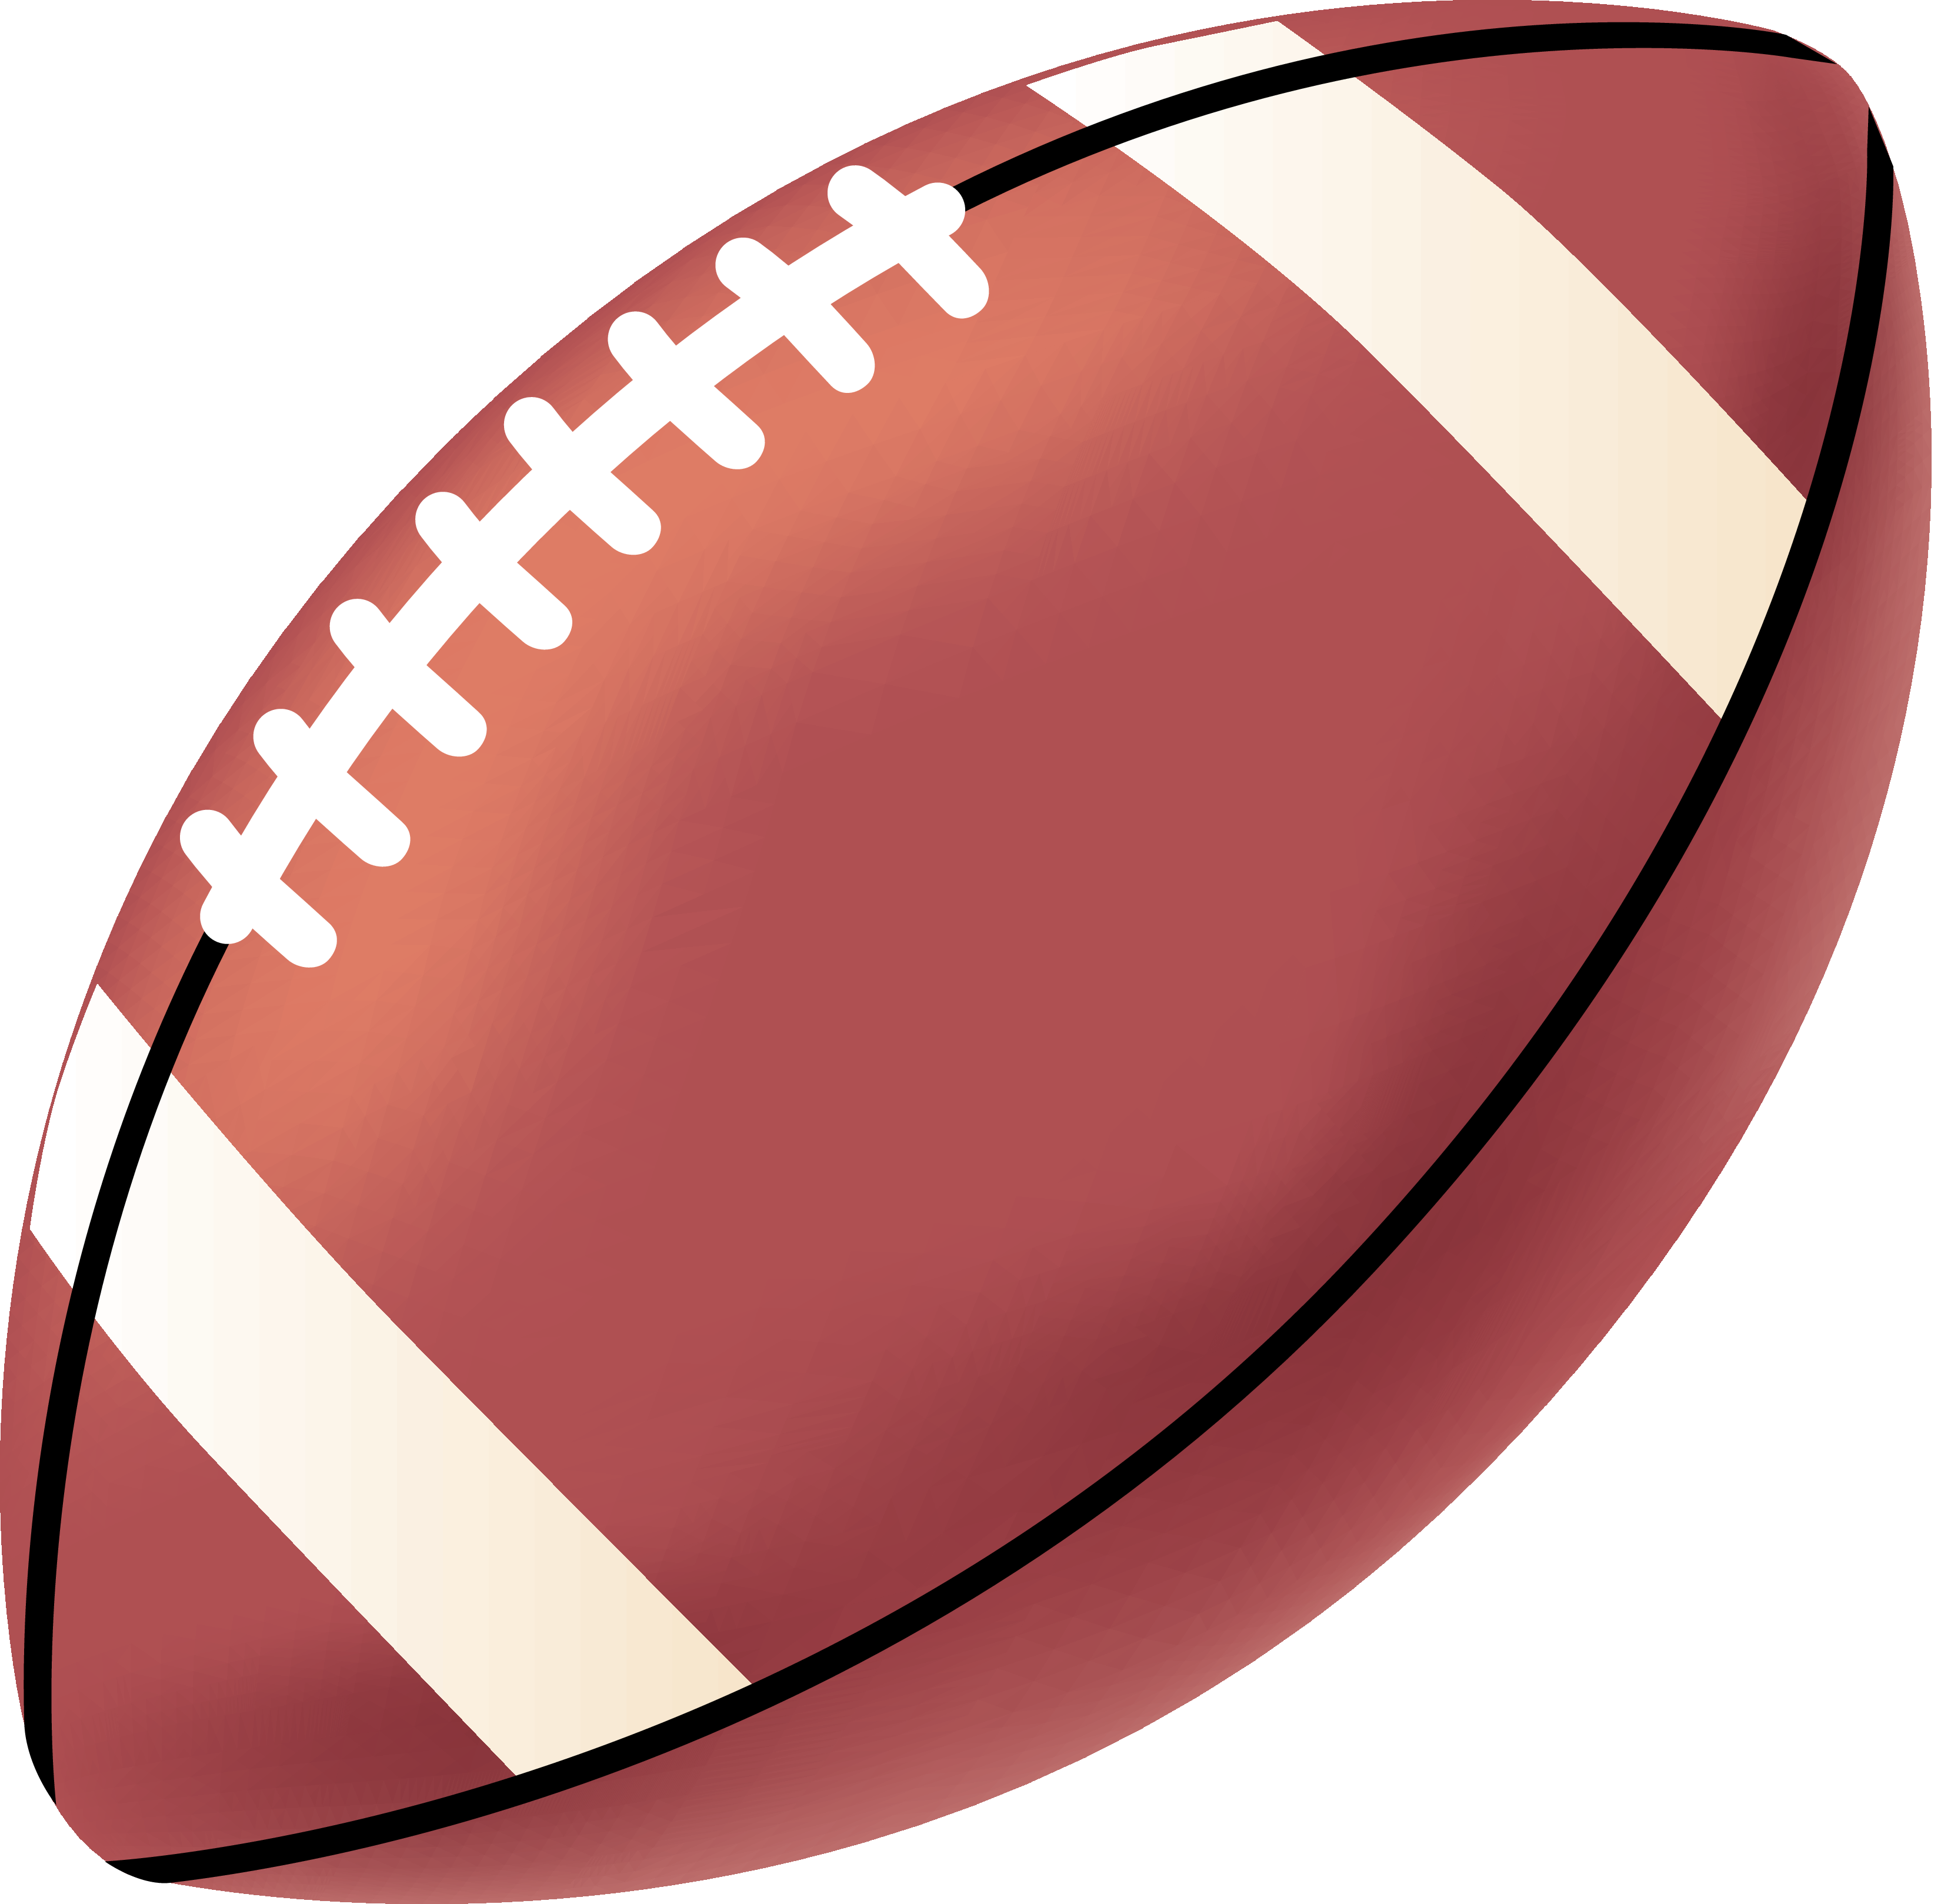 Flag football clipart wikiclipart